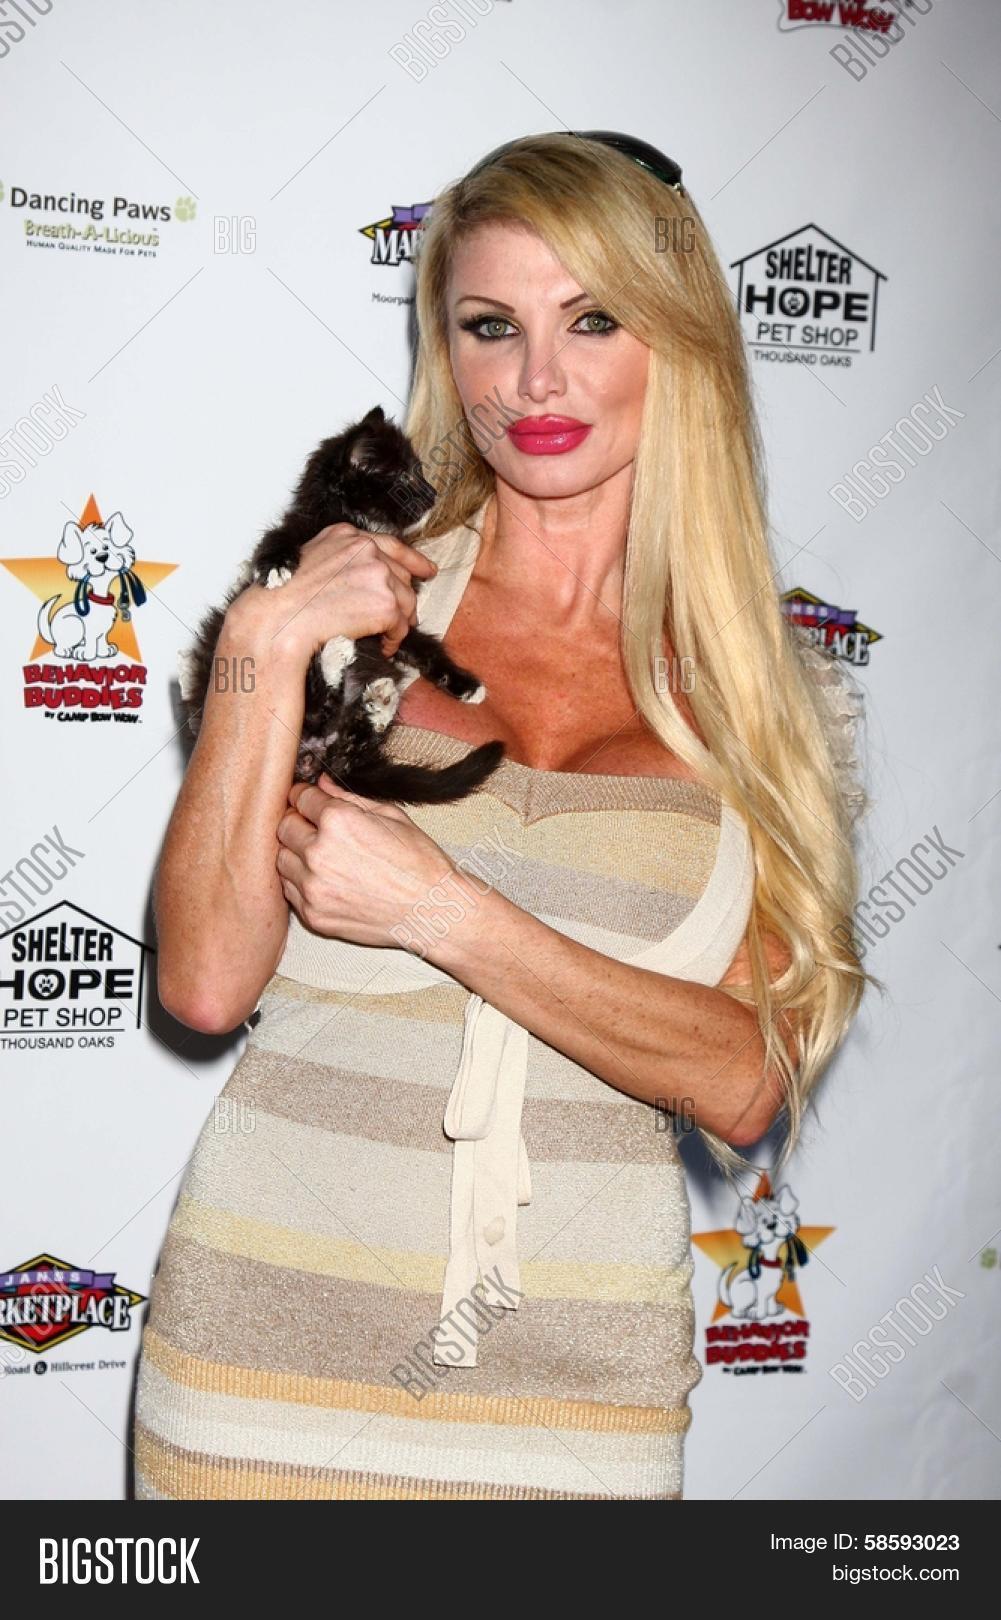 afsheen bilal recommends taylor wane pics pic